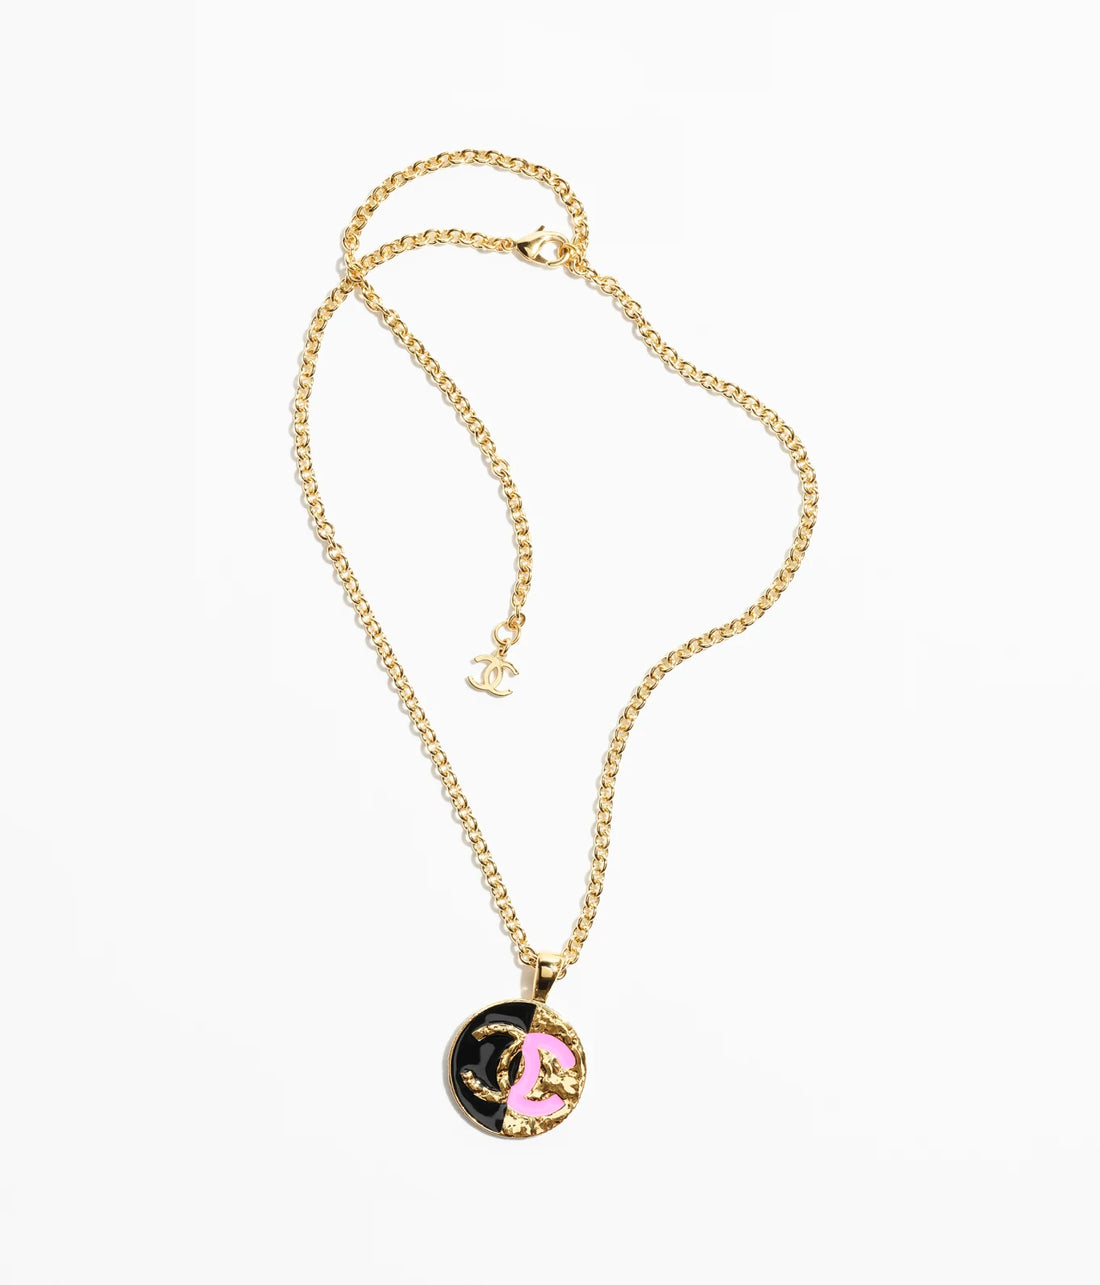 Chanel Necklace Dupe